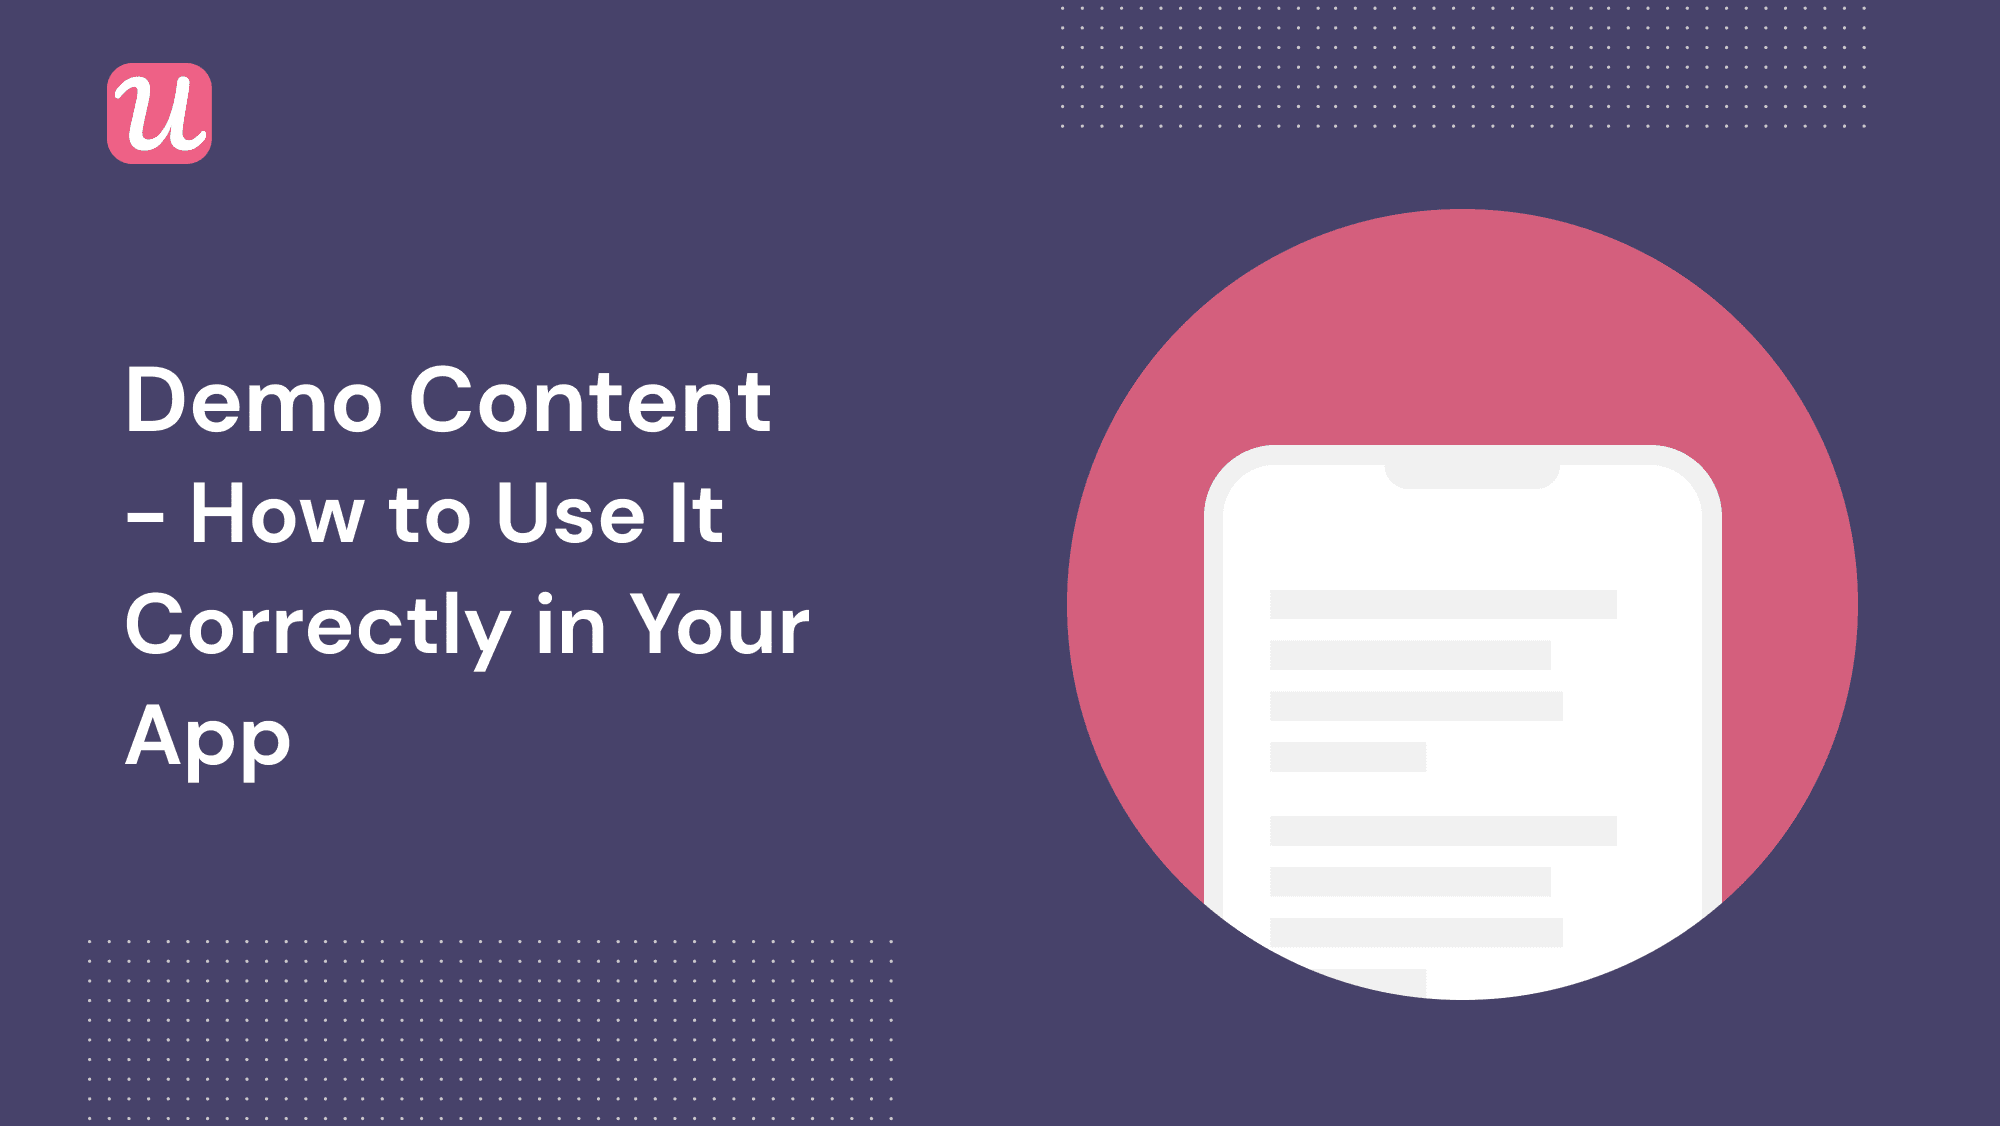 Demo Content 101: How to Use It Correctly in Your App